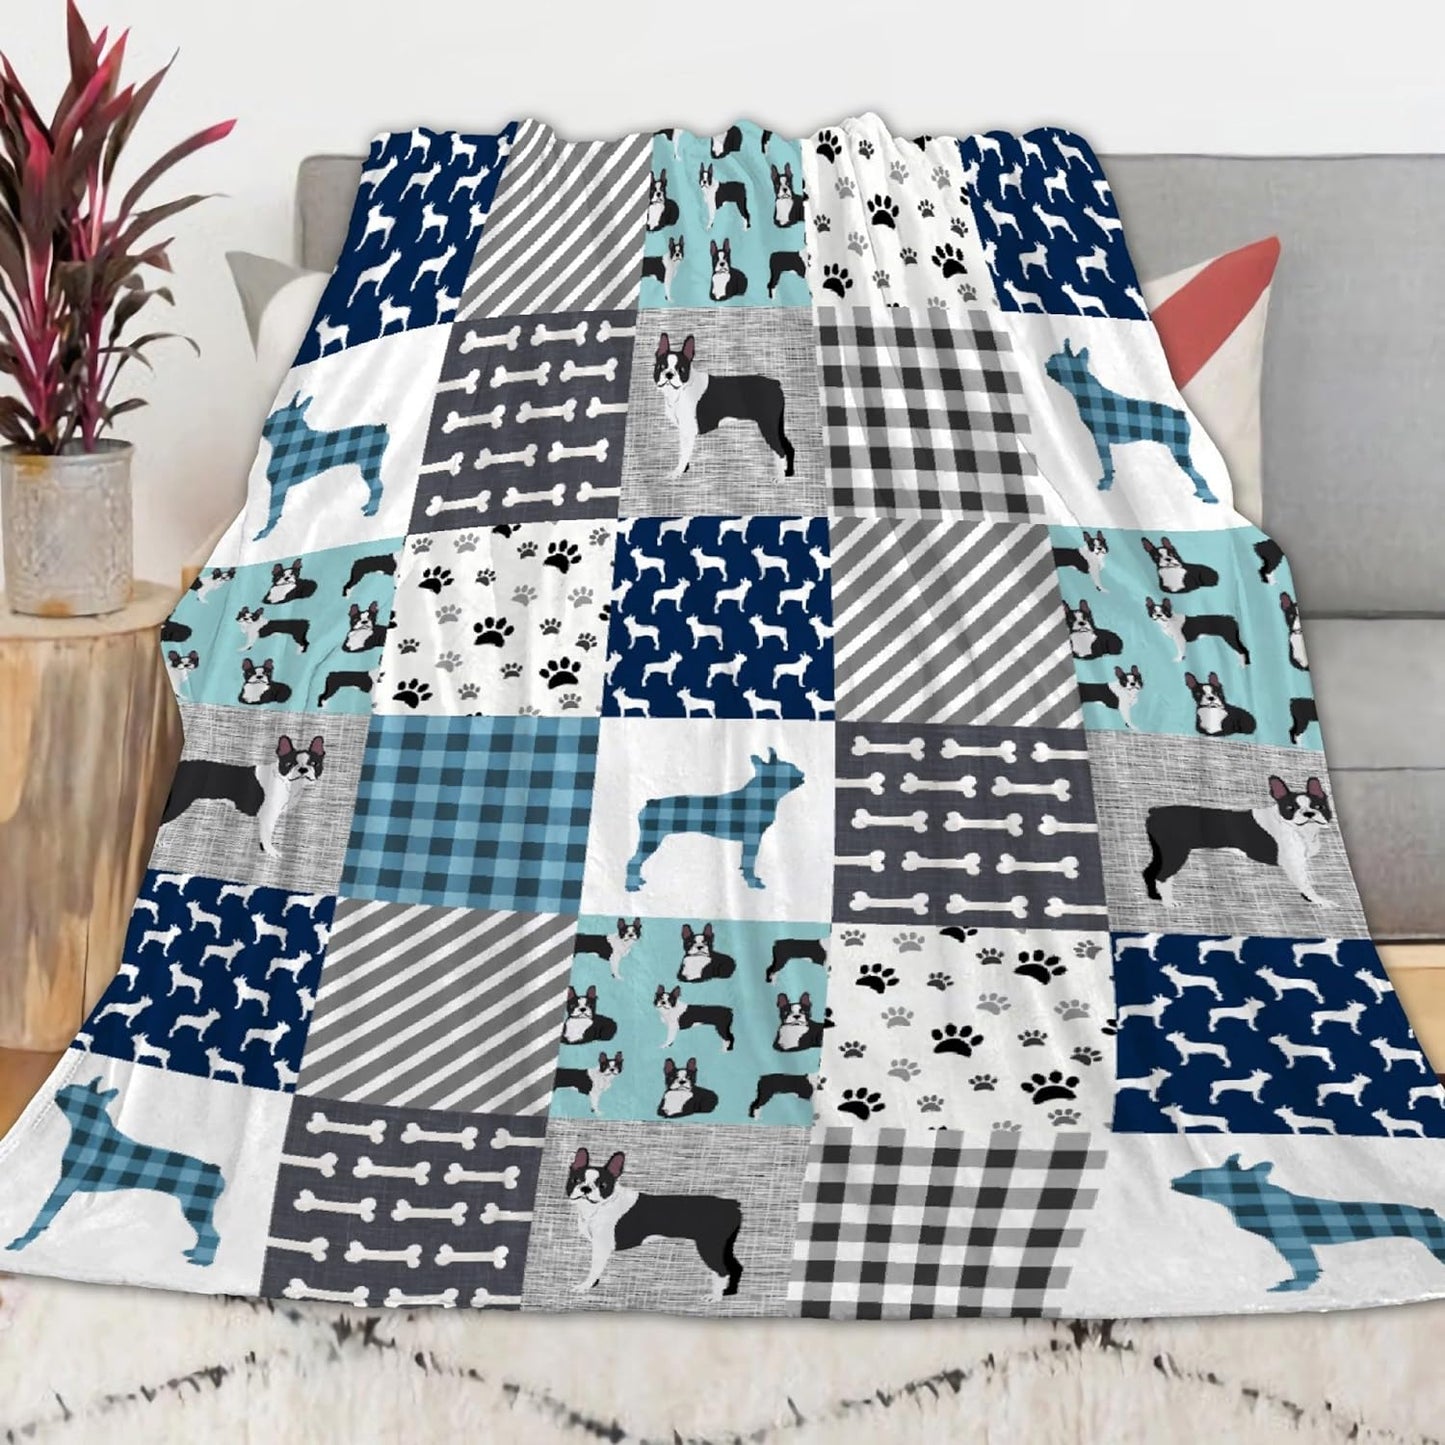 New Black French Bulldog Throw Blanket Warm Lightweight Soft Cozy Warm Home Decoration for Sofa, Sofa, Bed,Valentine's Day Easter Gifts 40"x50"